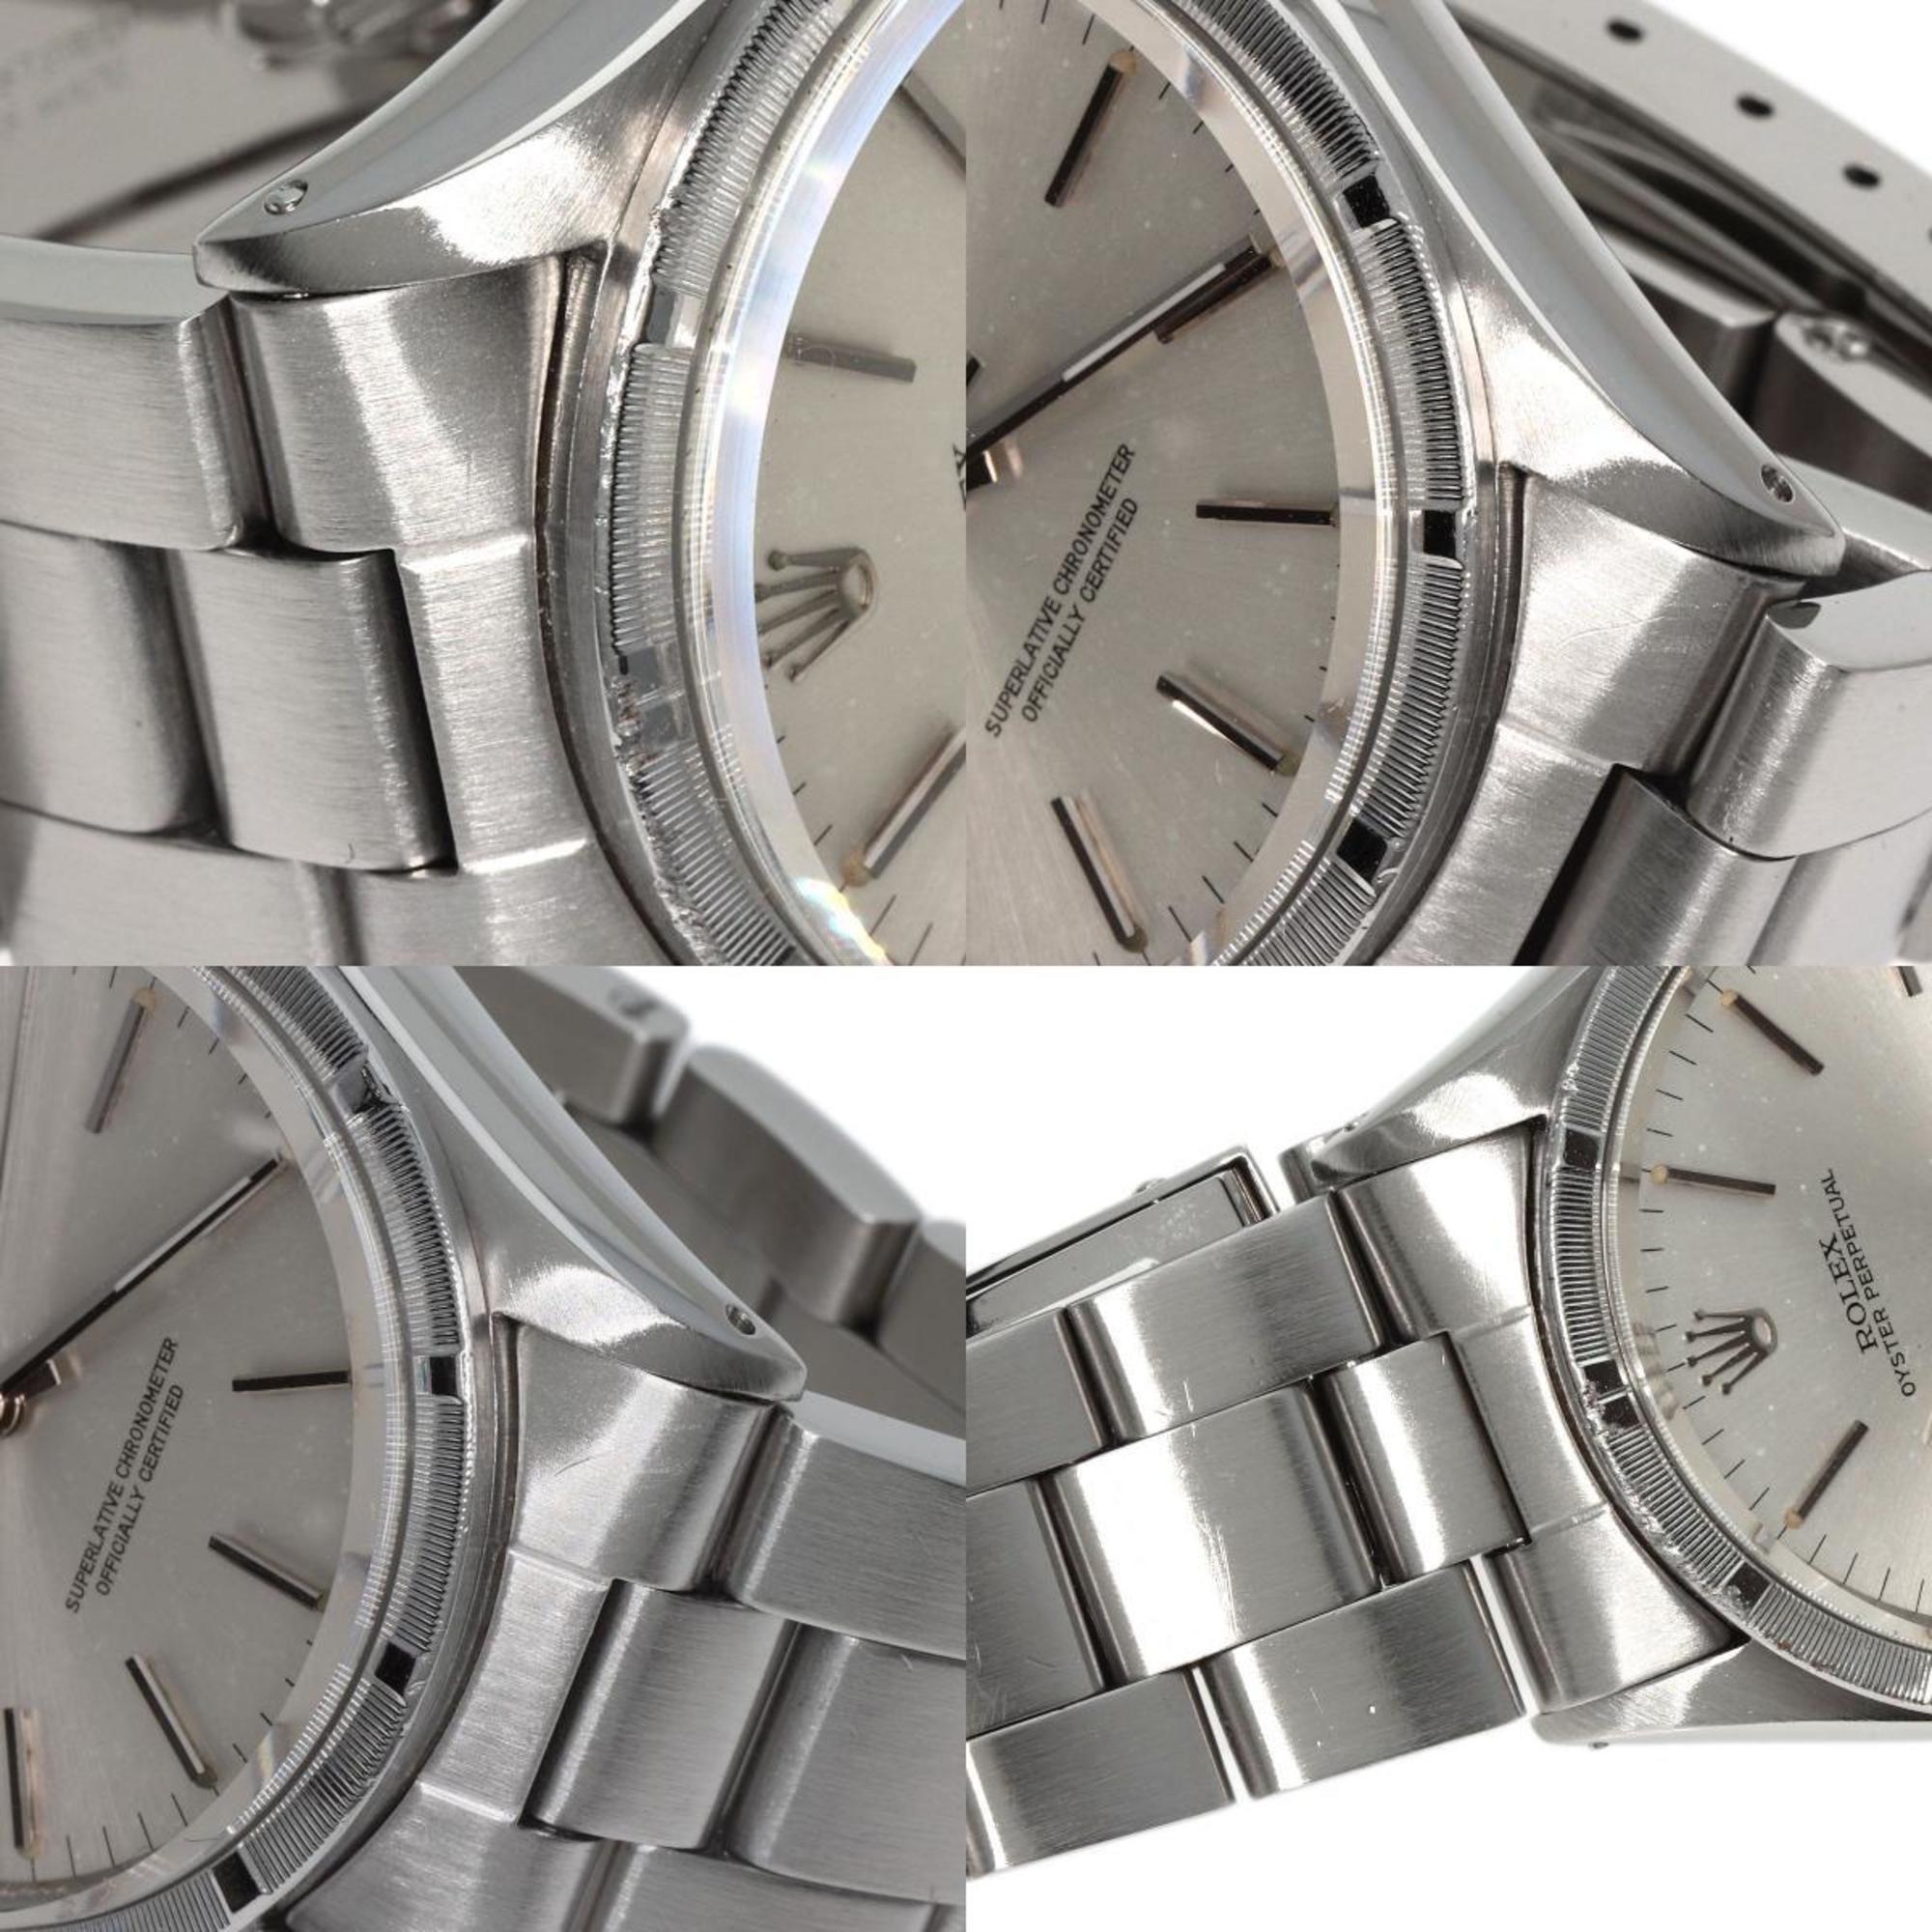 Rolex 1007 Oyster Perpetual 1973 Engine Turned Bezel Watch Stainless Steel SS Men's ROLEX